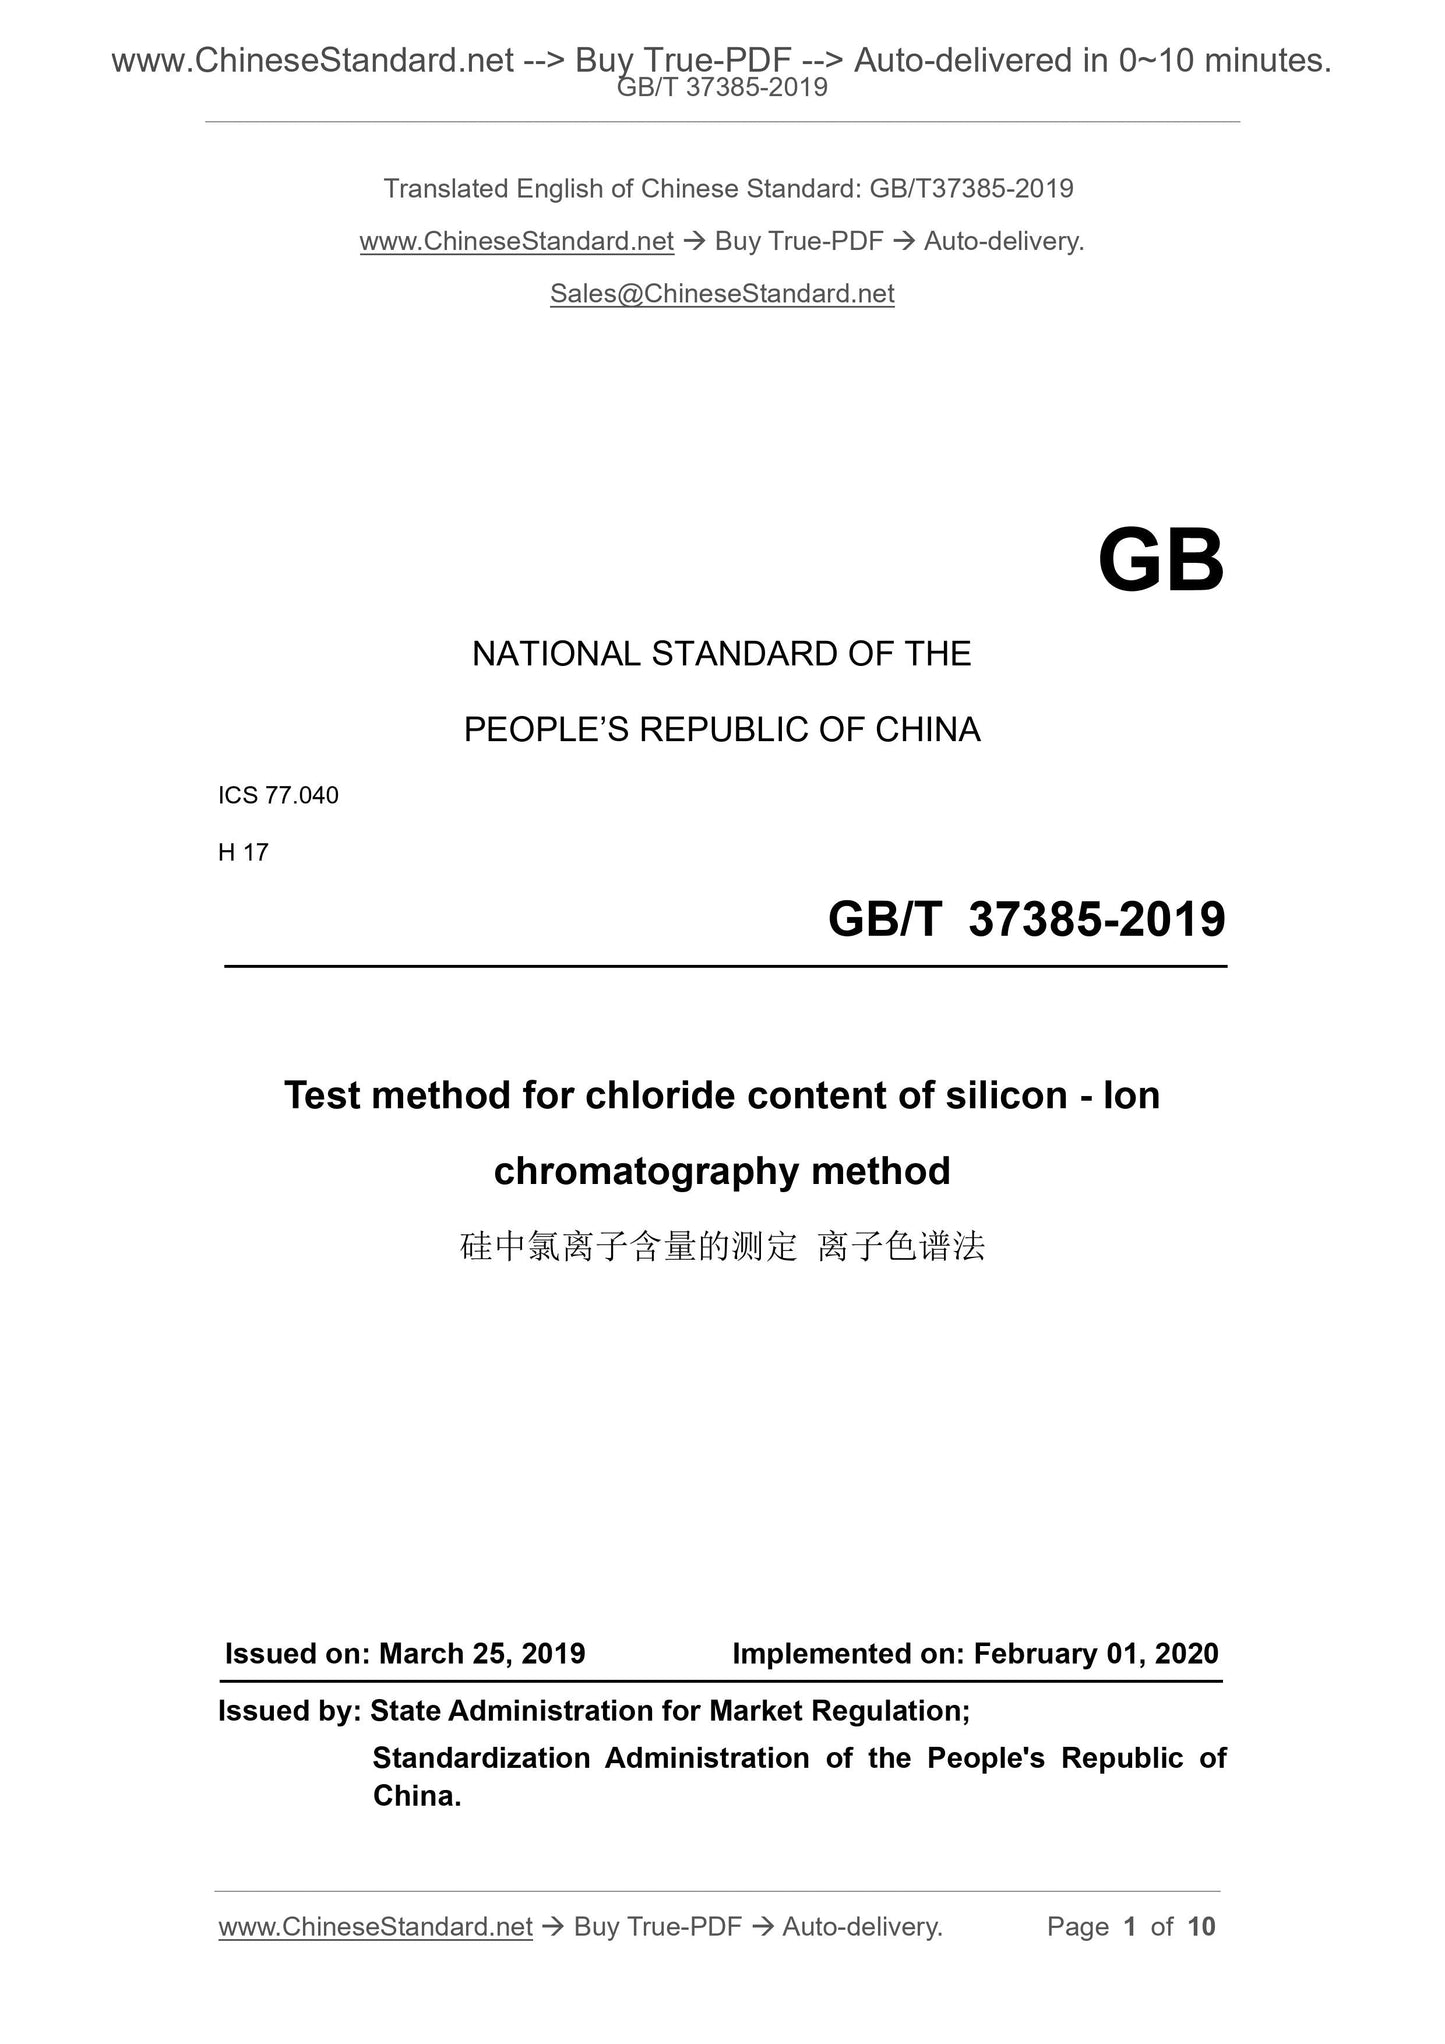 GB/T 37385-2019 Page 1